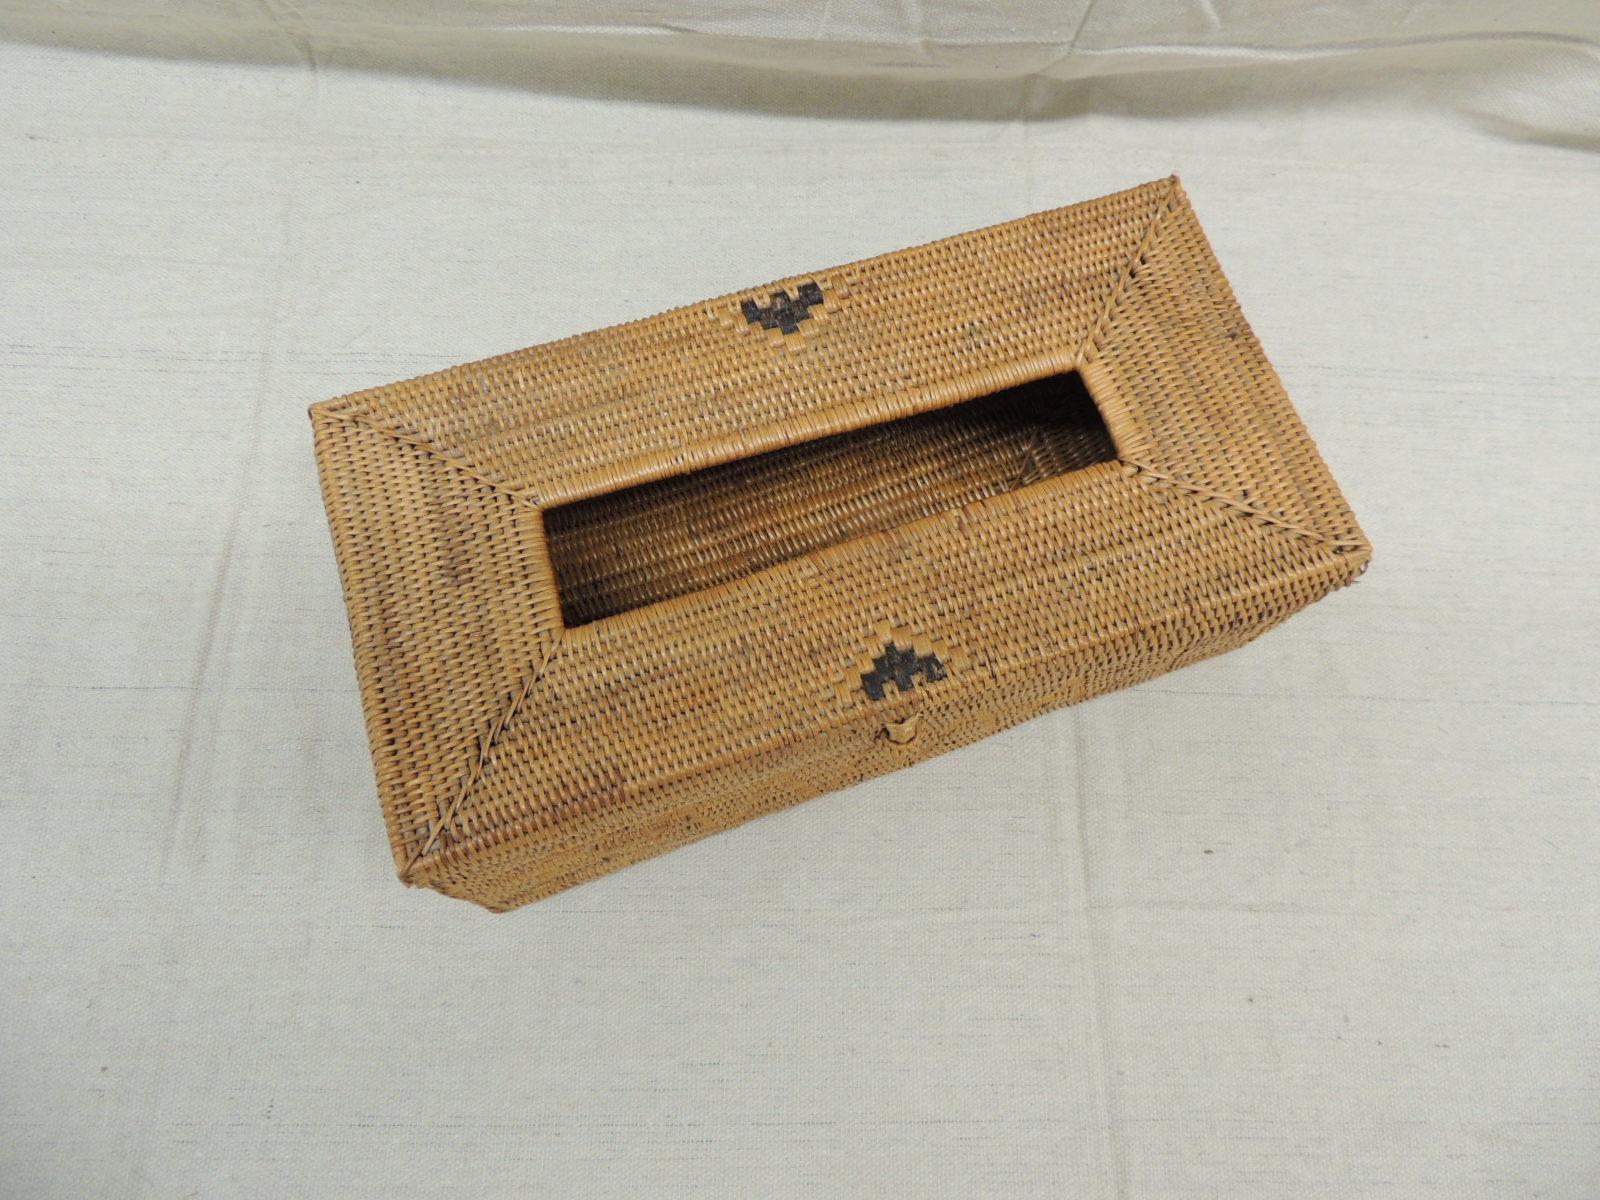 Vintage rattan rectangular tissue box holder
Woven details with hinged lid and a small closure belt.
Zig Zag front pattern
Size: 11 x 5.5 x 3.5 H.